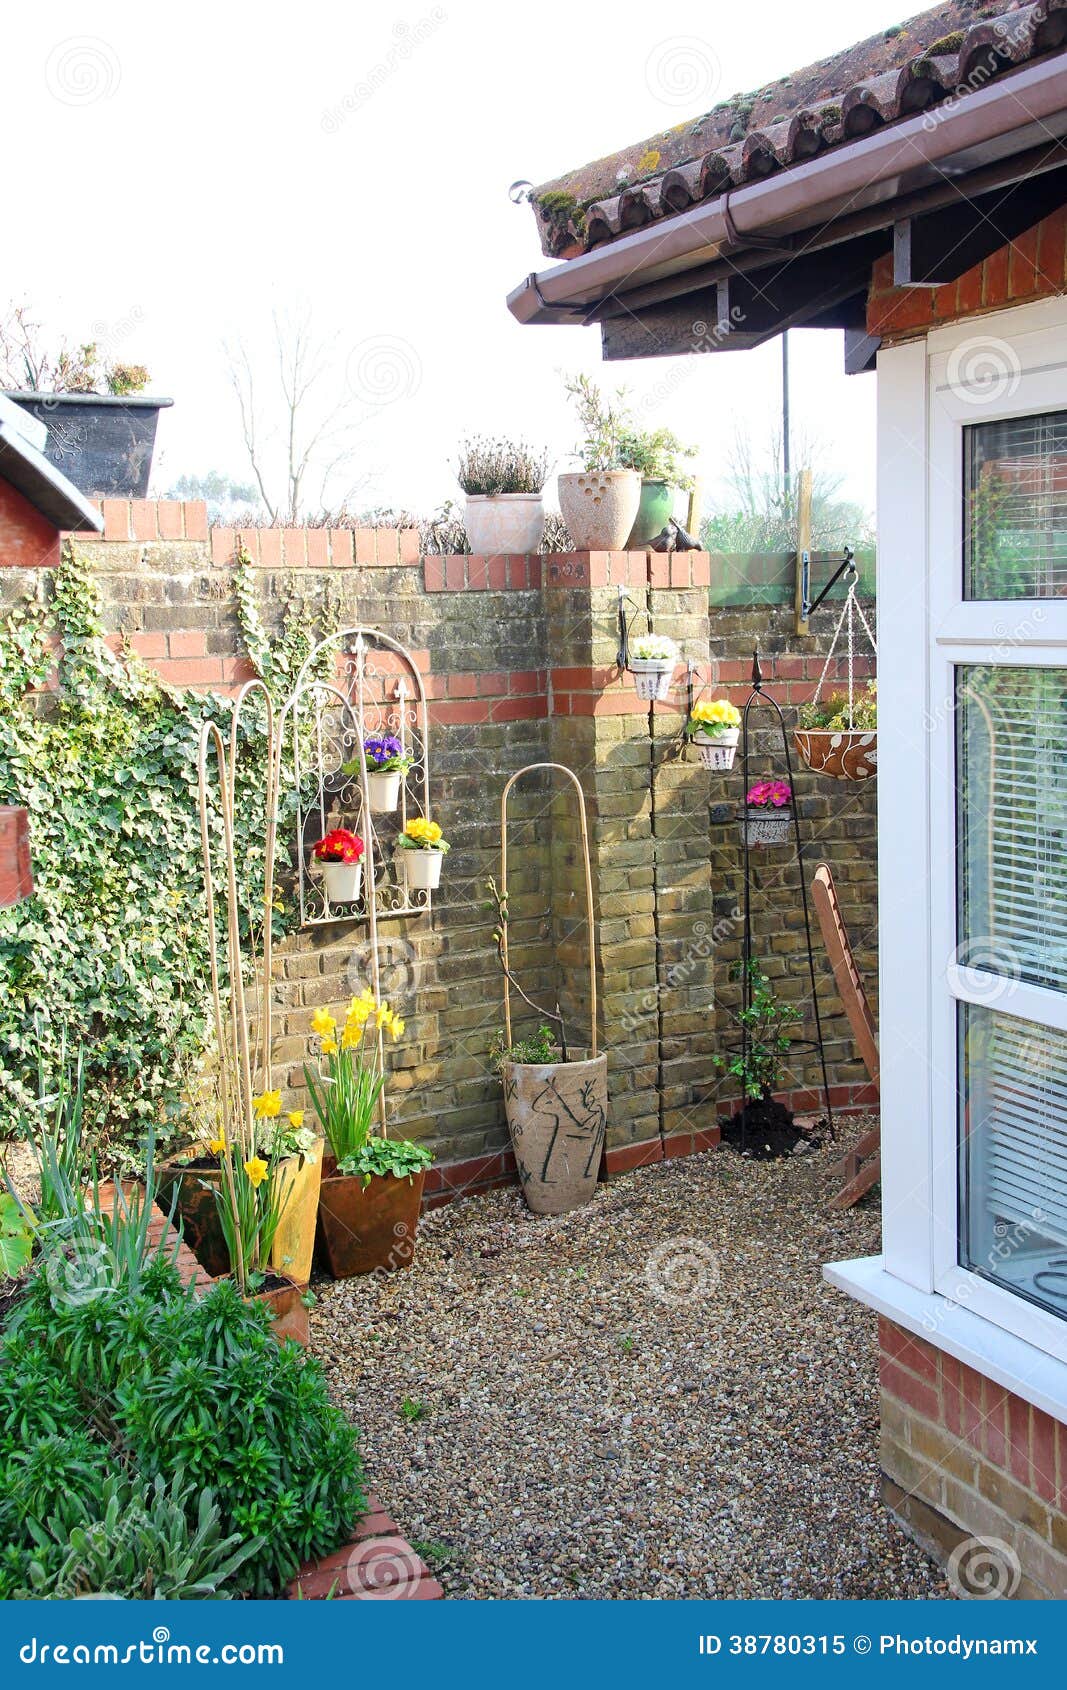 Small Cottage Courtyard Garden Stock Image - Image: 38780315